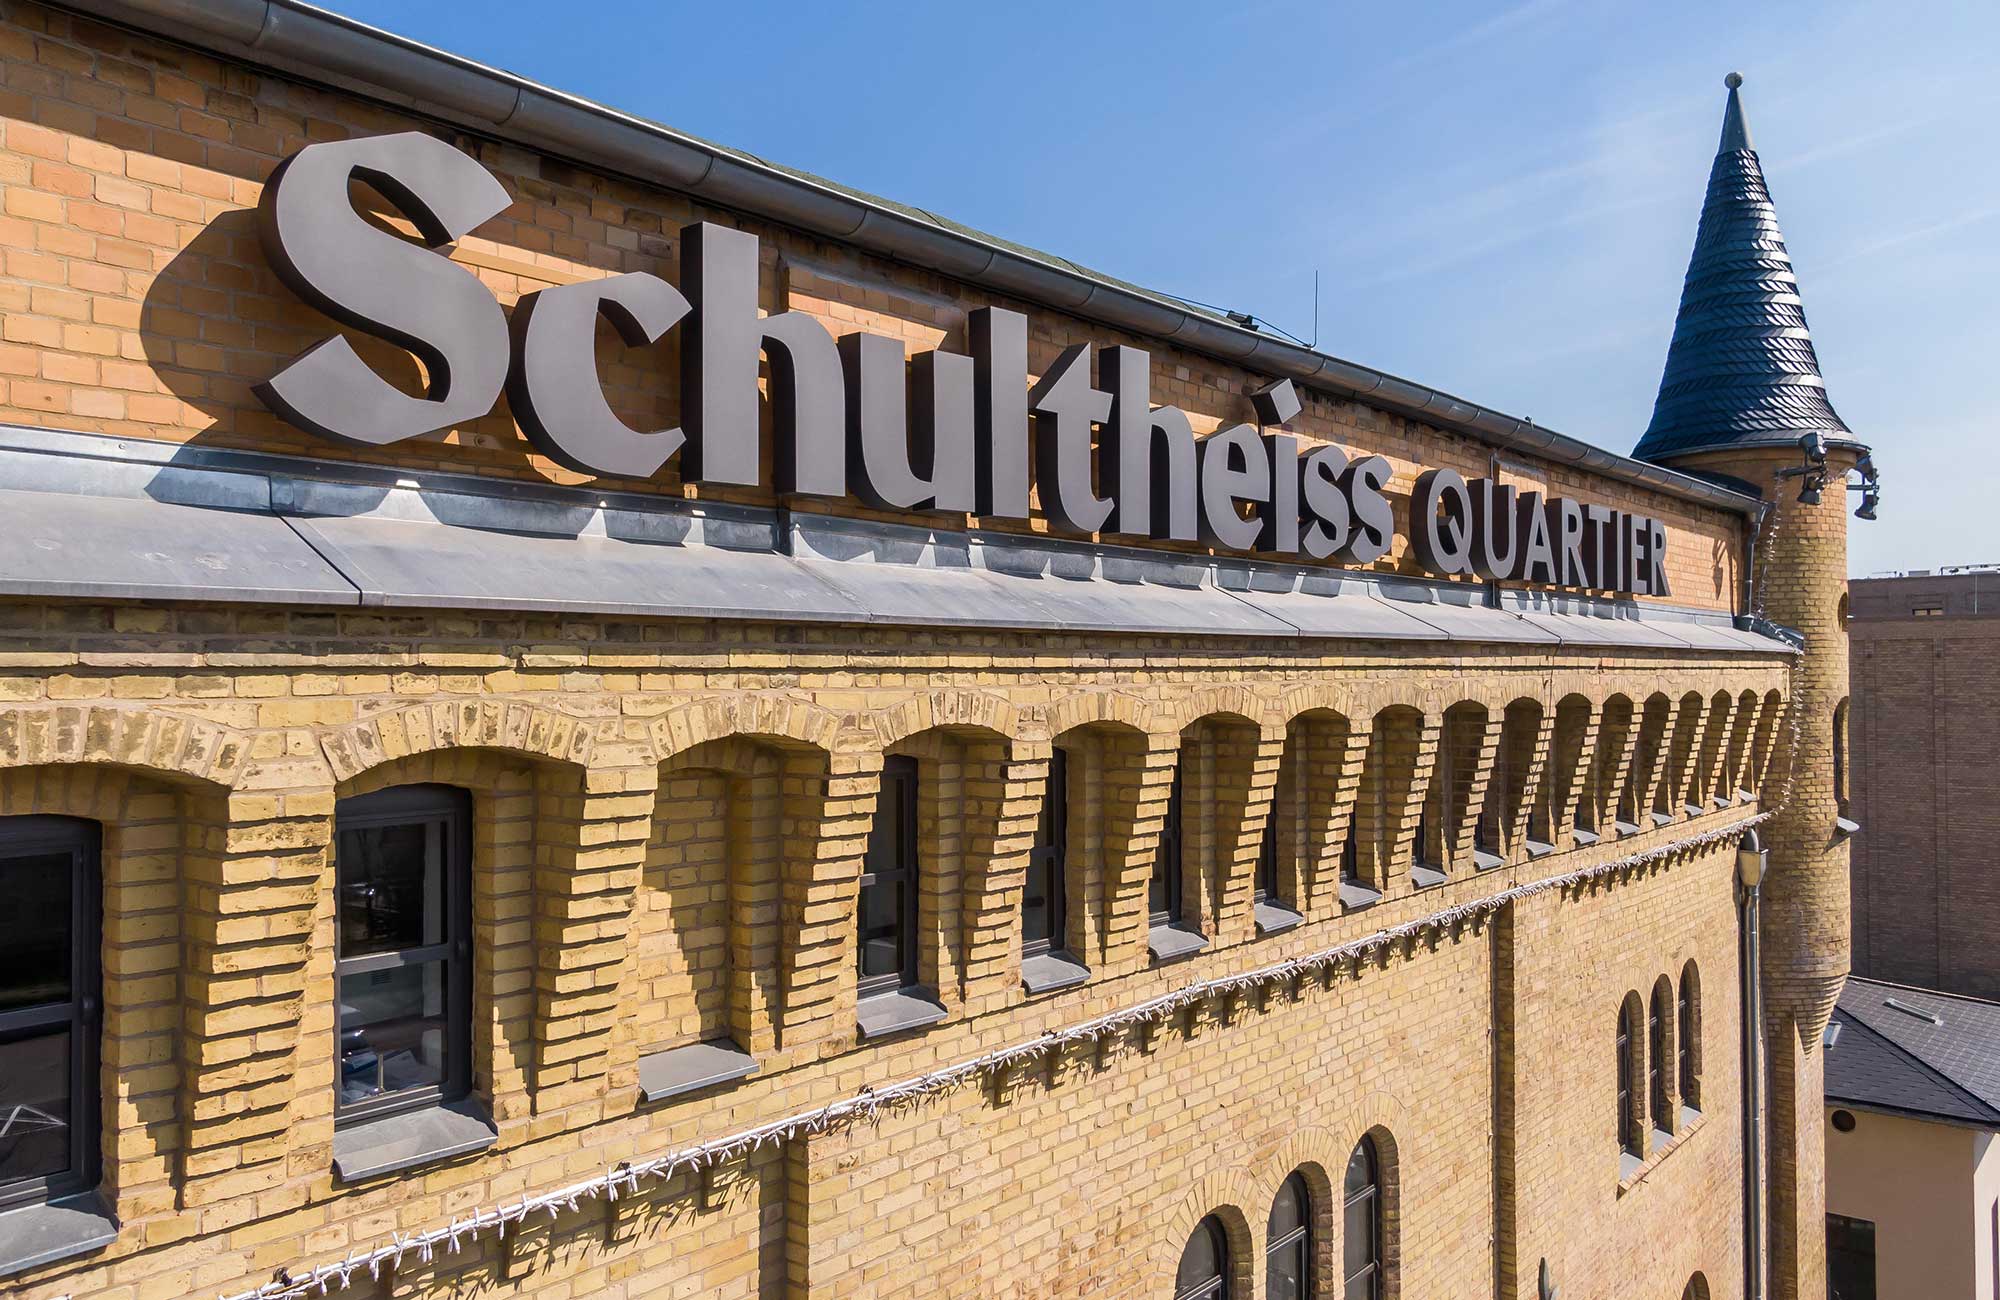 Schultheiss Quartier a project by HGHI Holding GmbH